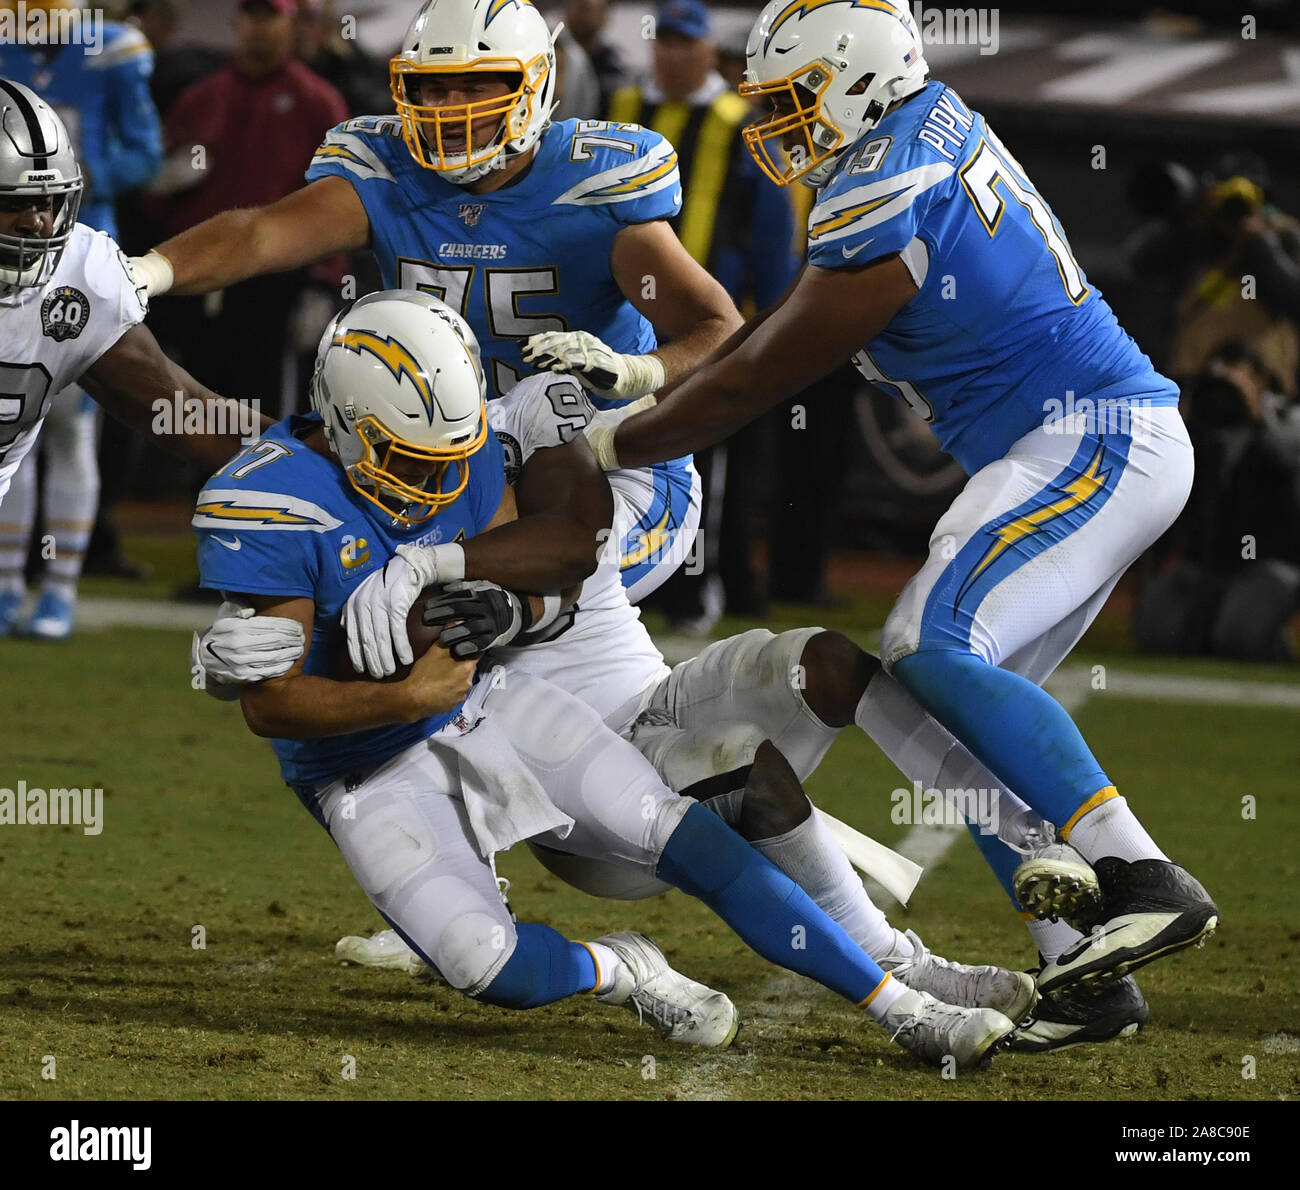 Oakland, United States. 07th Nov, 2019. Los Angeles Chargers quarterback Philip Rivers is sacked for a loss of three yards by Oakland Raiders Clelin Ferrell (96) in the fourth quarter quarter at the Alameda County Coliseum in Oakland, California on Thursday, November 7, 2019. The Raiders defeated the Chargers 26-24. Photo by Terry Schmitt/UPI Credit: UPI/Alamy Live News Stock Photo